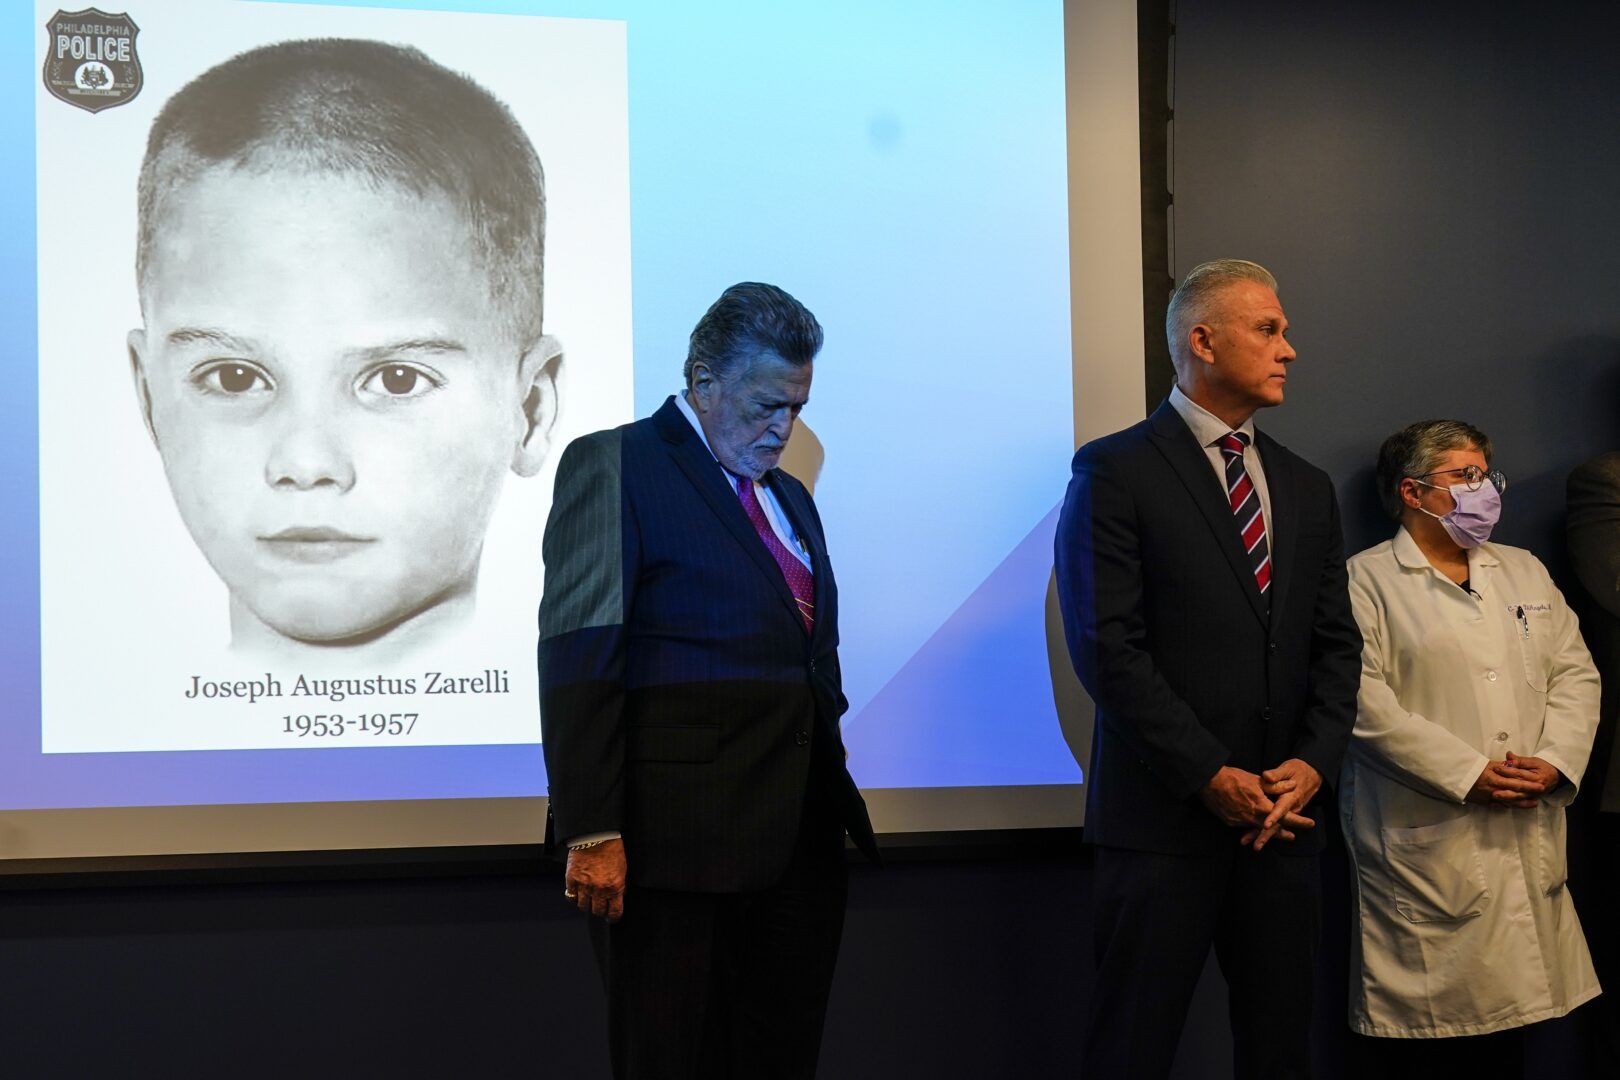 William C. Fleisher, with the Vidocq Society, center, Philadelphia Police Captain Jason Smith, and Dr. Constance DiAngelo, Philadelphia Chief Medical Examiner, listen during during a news conference in Philadelphia, Thursday, Dec. 8, 2022.